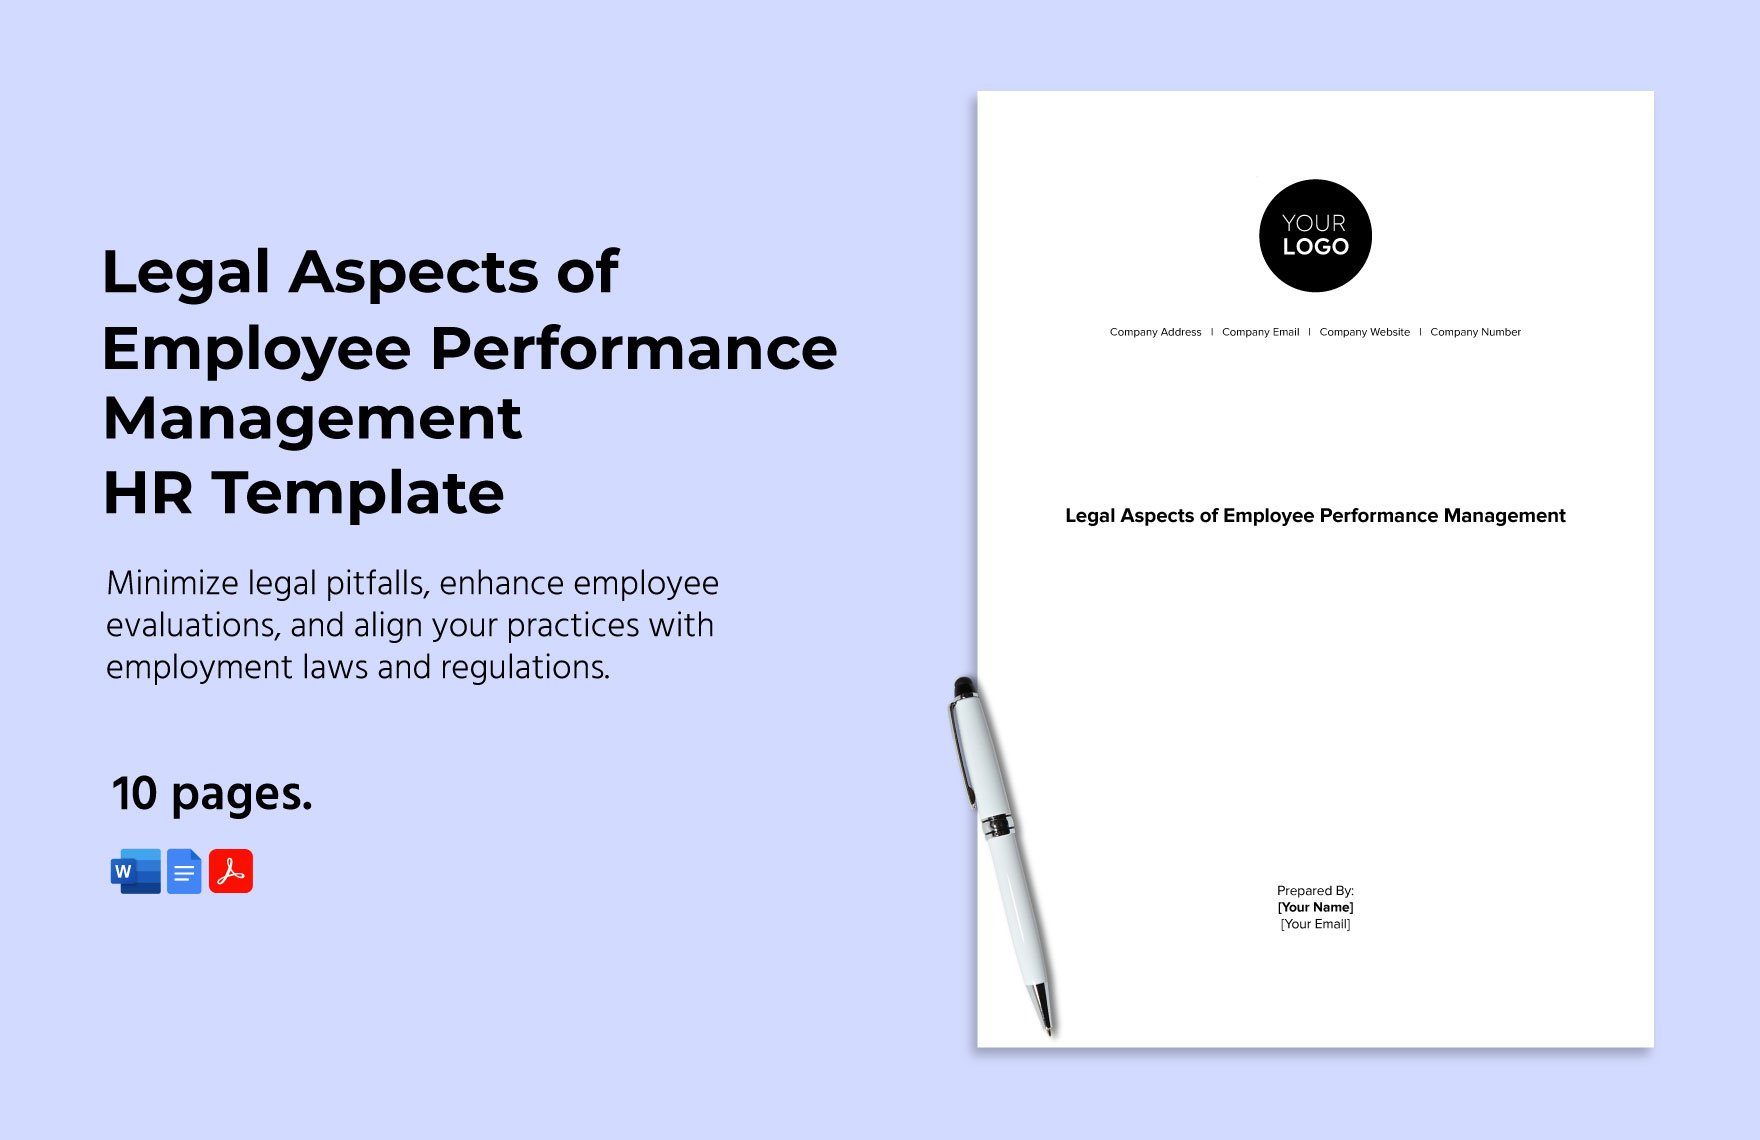 Legal Aspects of Employee Performance Management HR Template